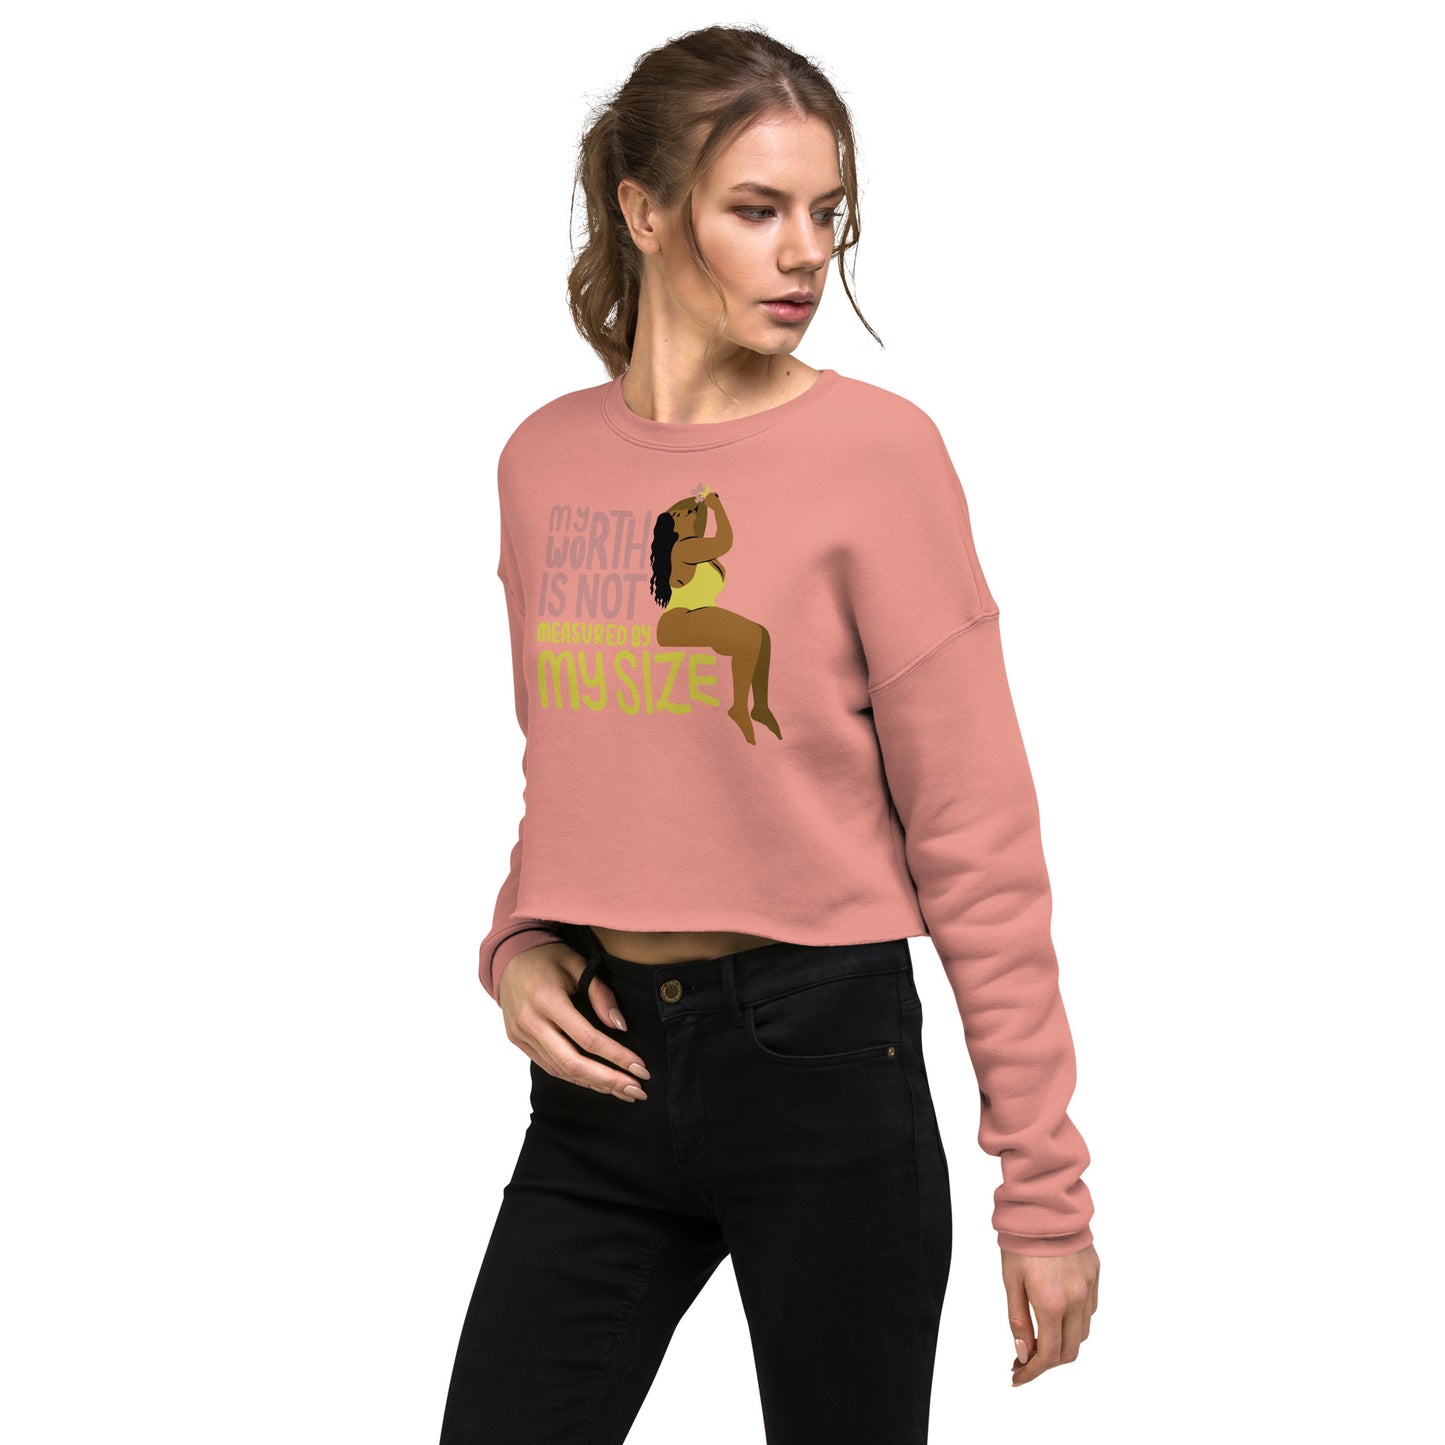 Crop Sweatshirt Womens (My Worth Is Not Measured By My Size - Inspiration 0015)